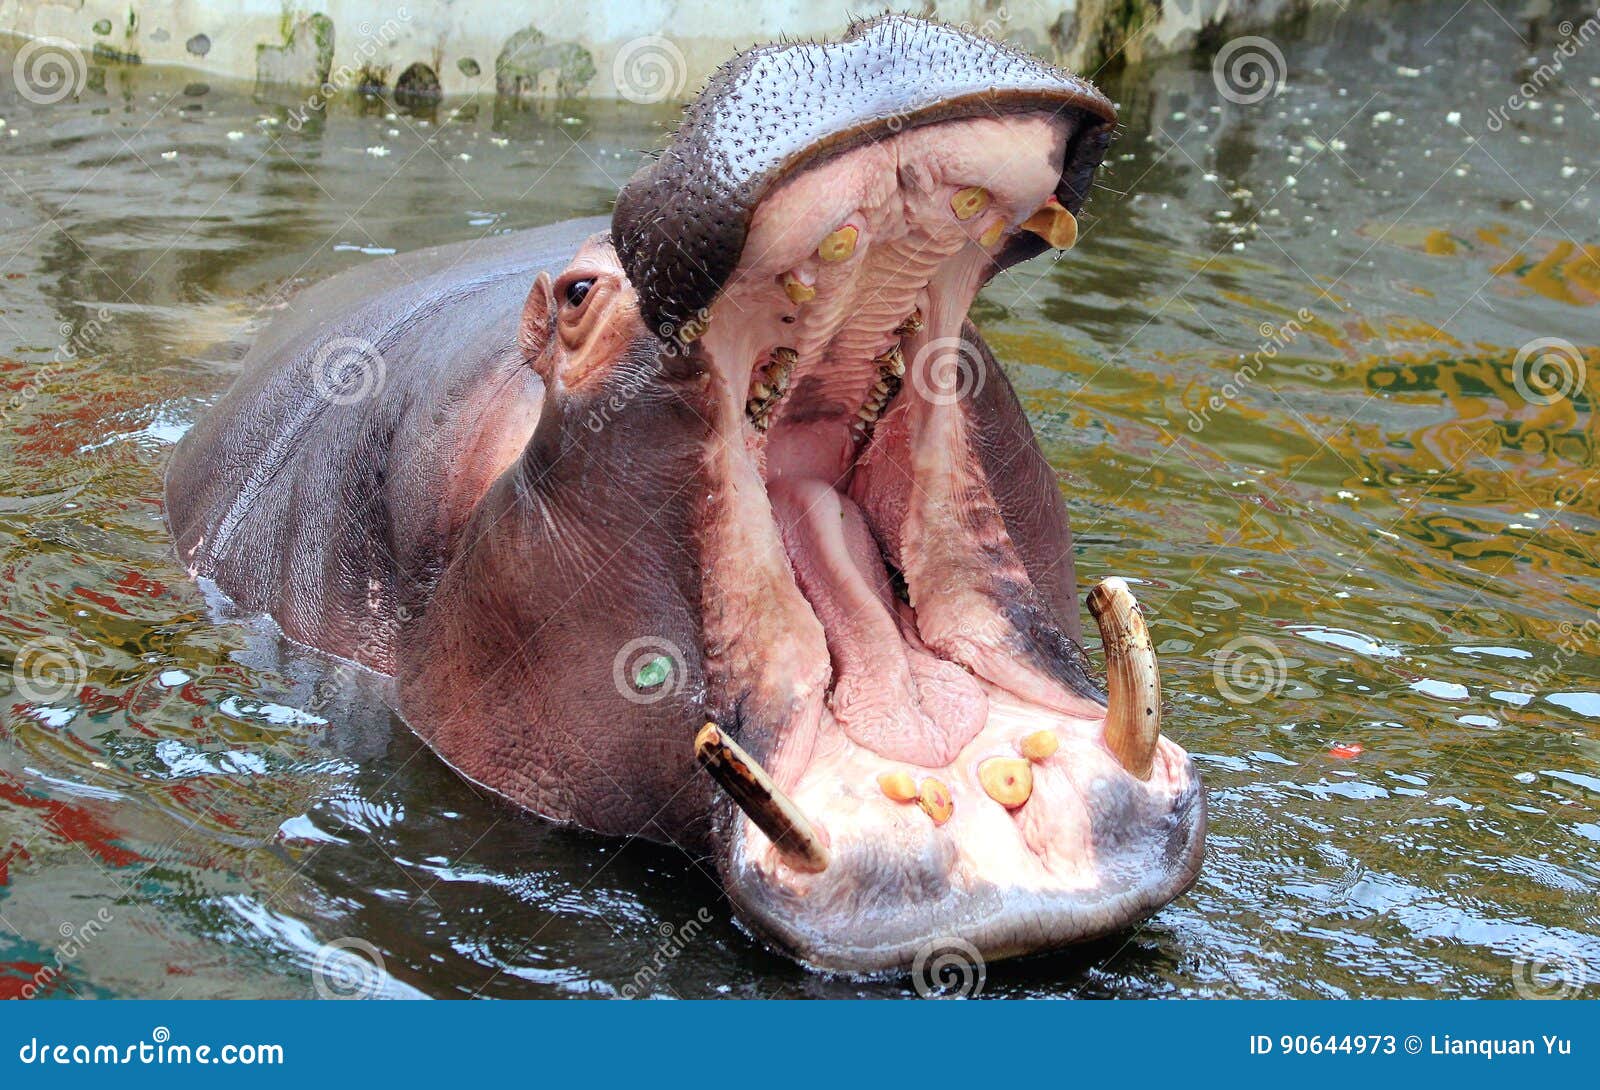 Hippo open the big mouth stock image. Image of animals - 90644973